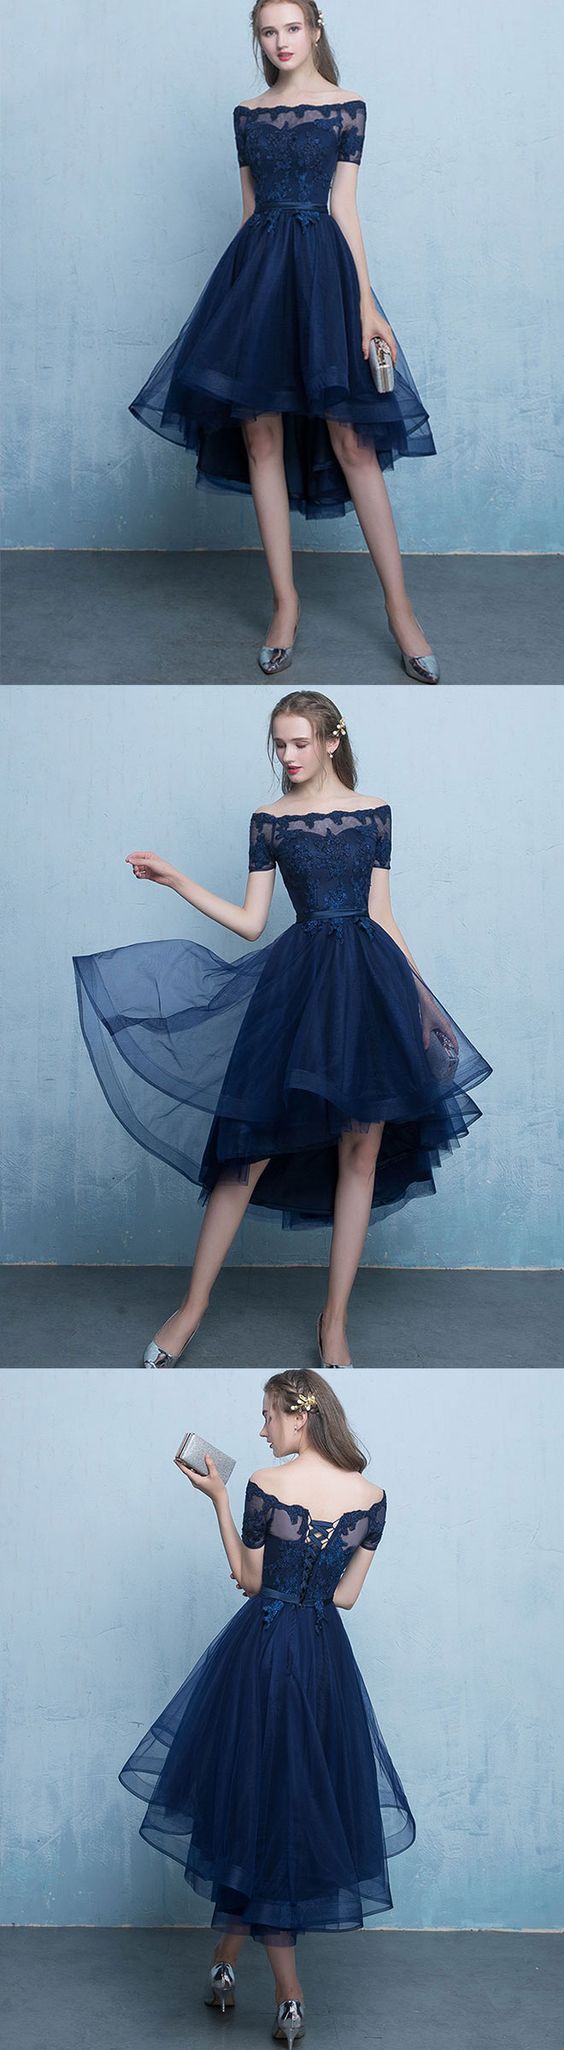 Dark Blue Lace Tulle Short Prom Dress, High Low Evening Dress M1075